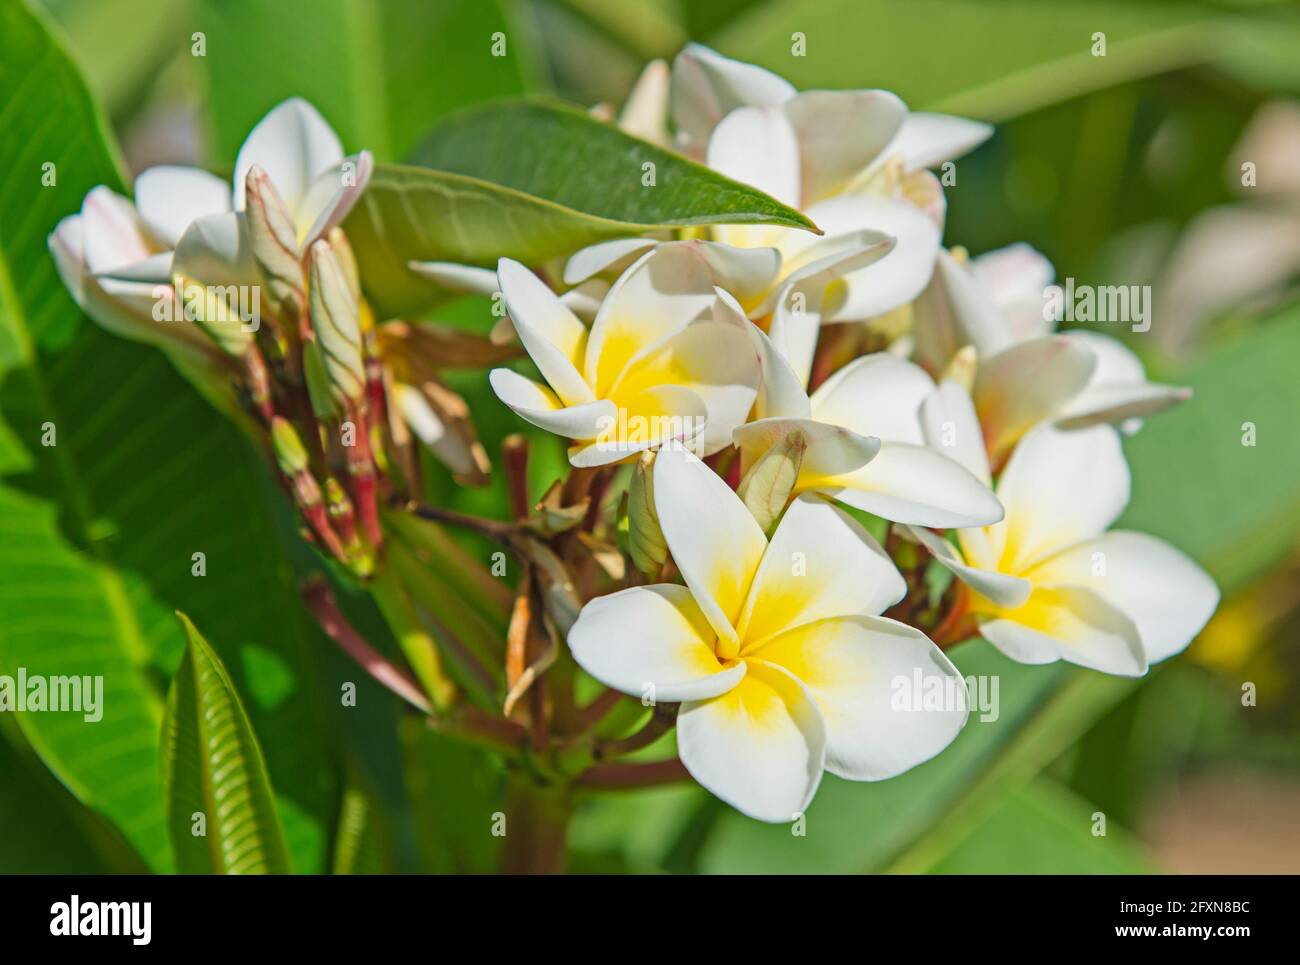 Close-up detail of white and yellow frangipani plumeria flower petals in garden Stock Photo